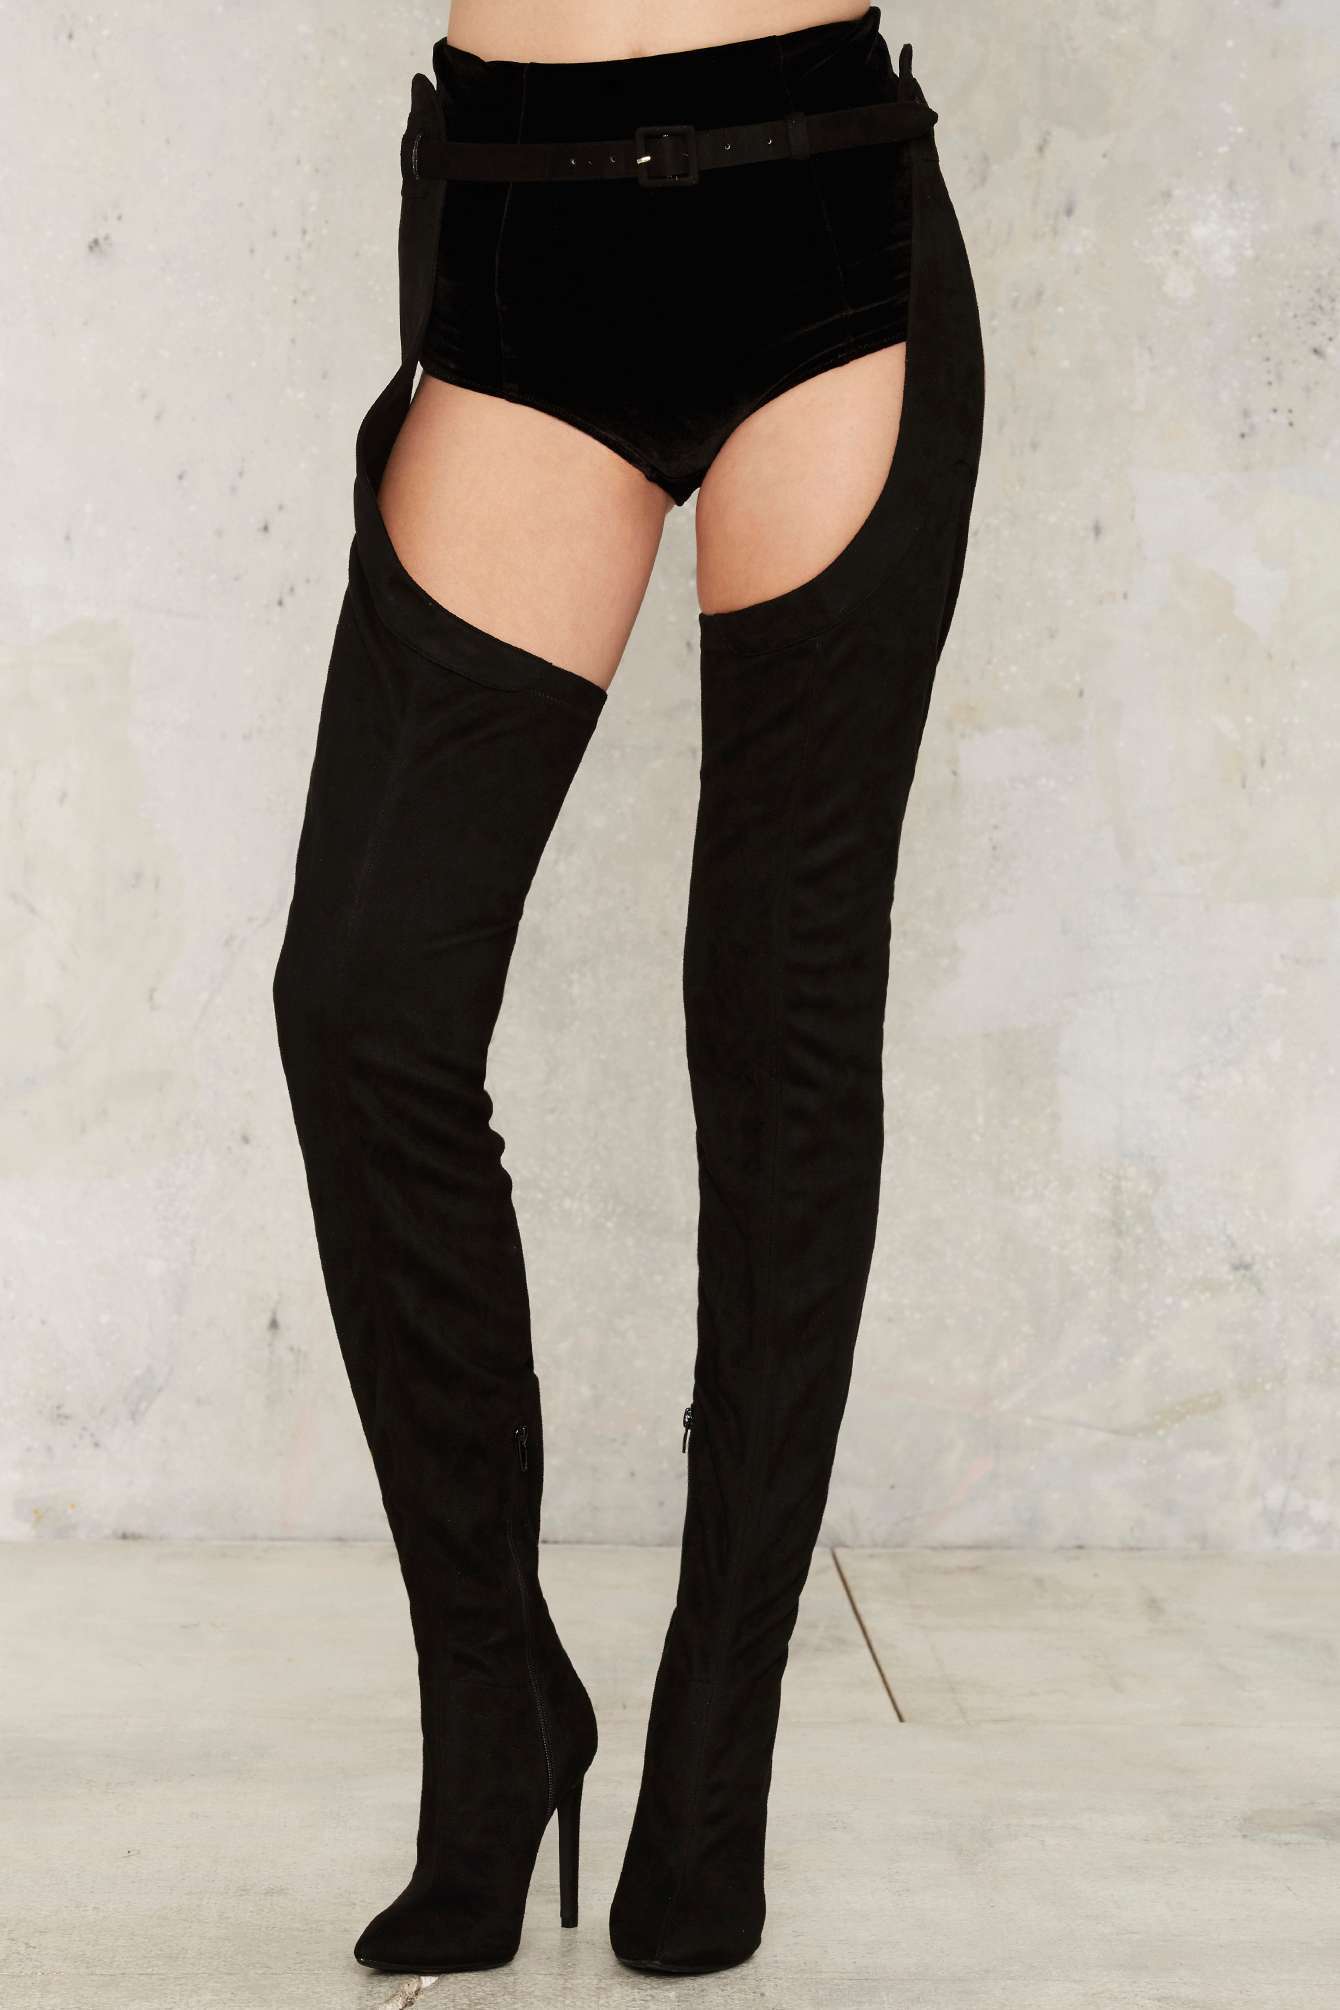 thigh high boots attached to belt